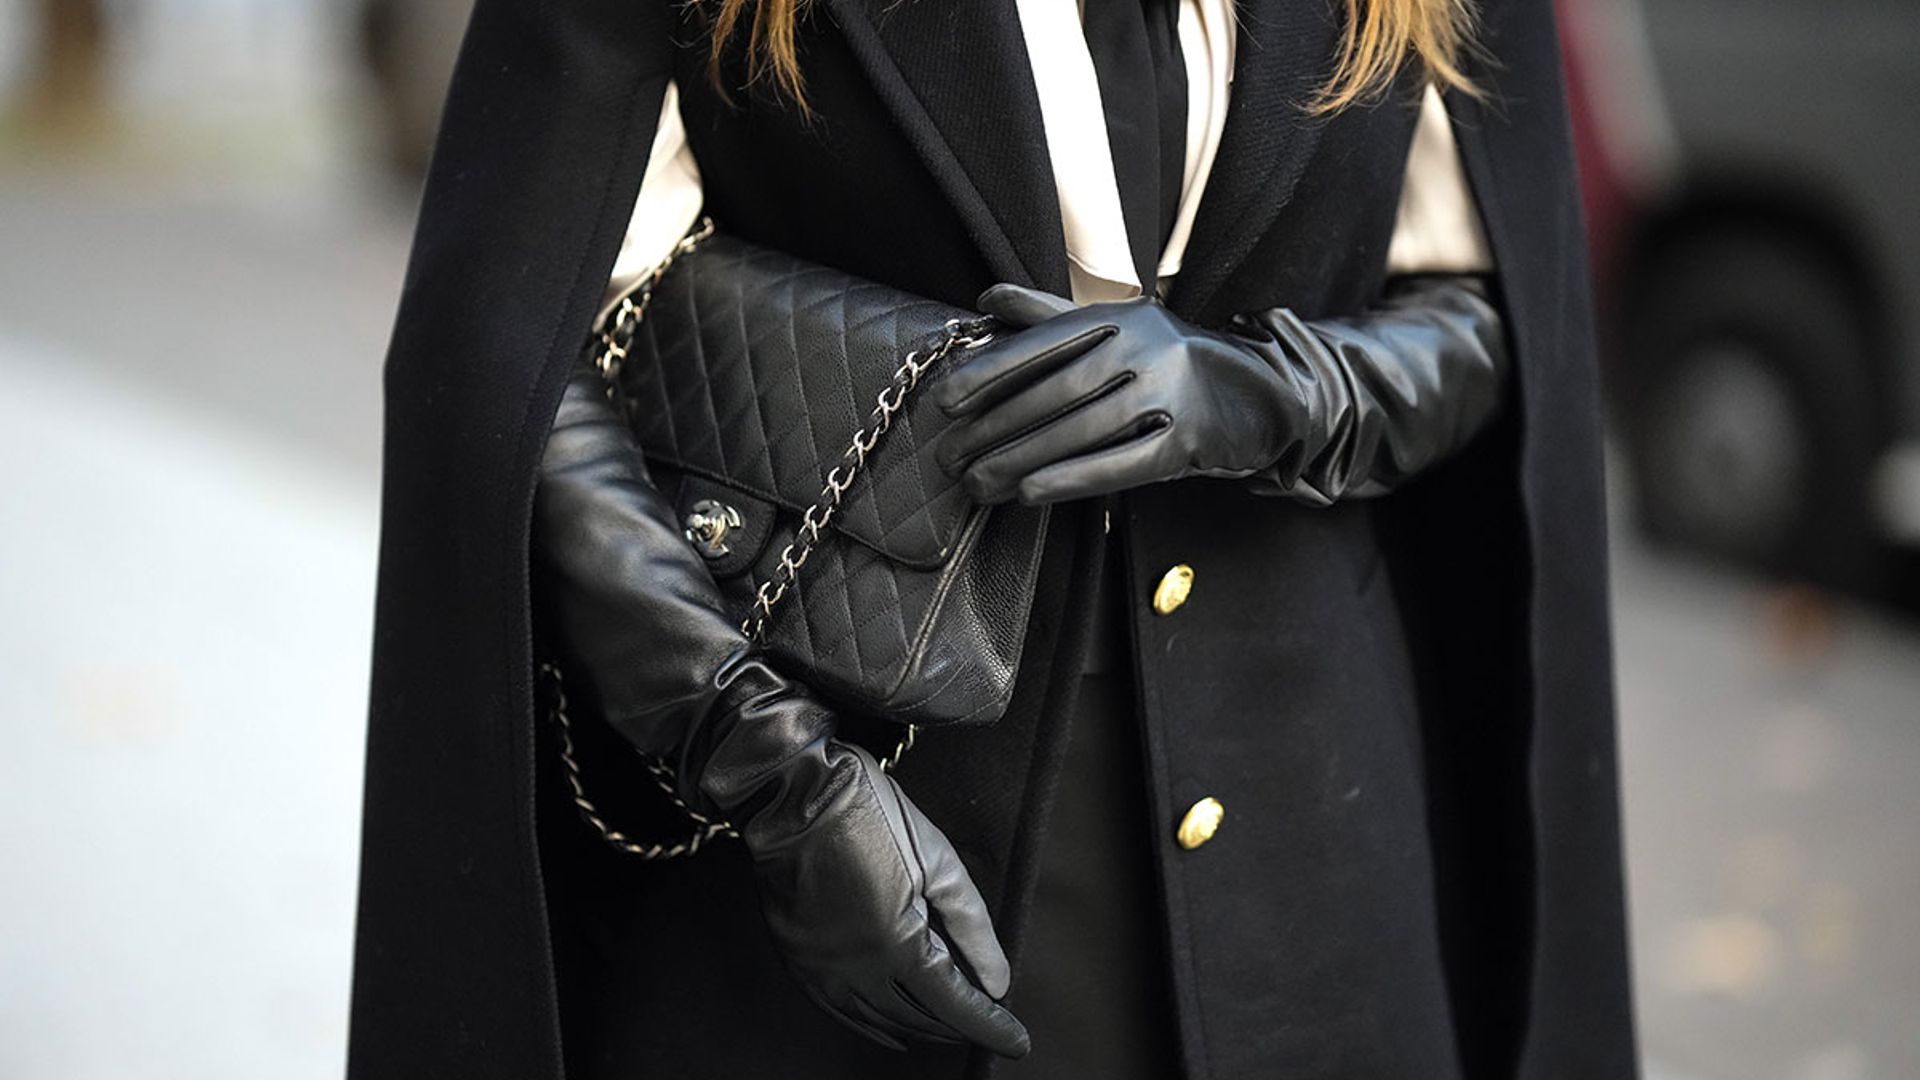 Best leather gloves for women 2022: From John Lewis, M&S, ASOS, Accessorize  and more